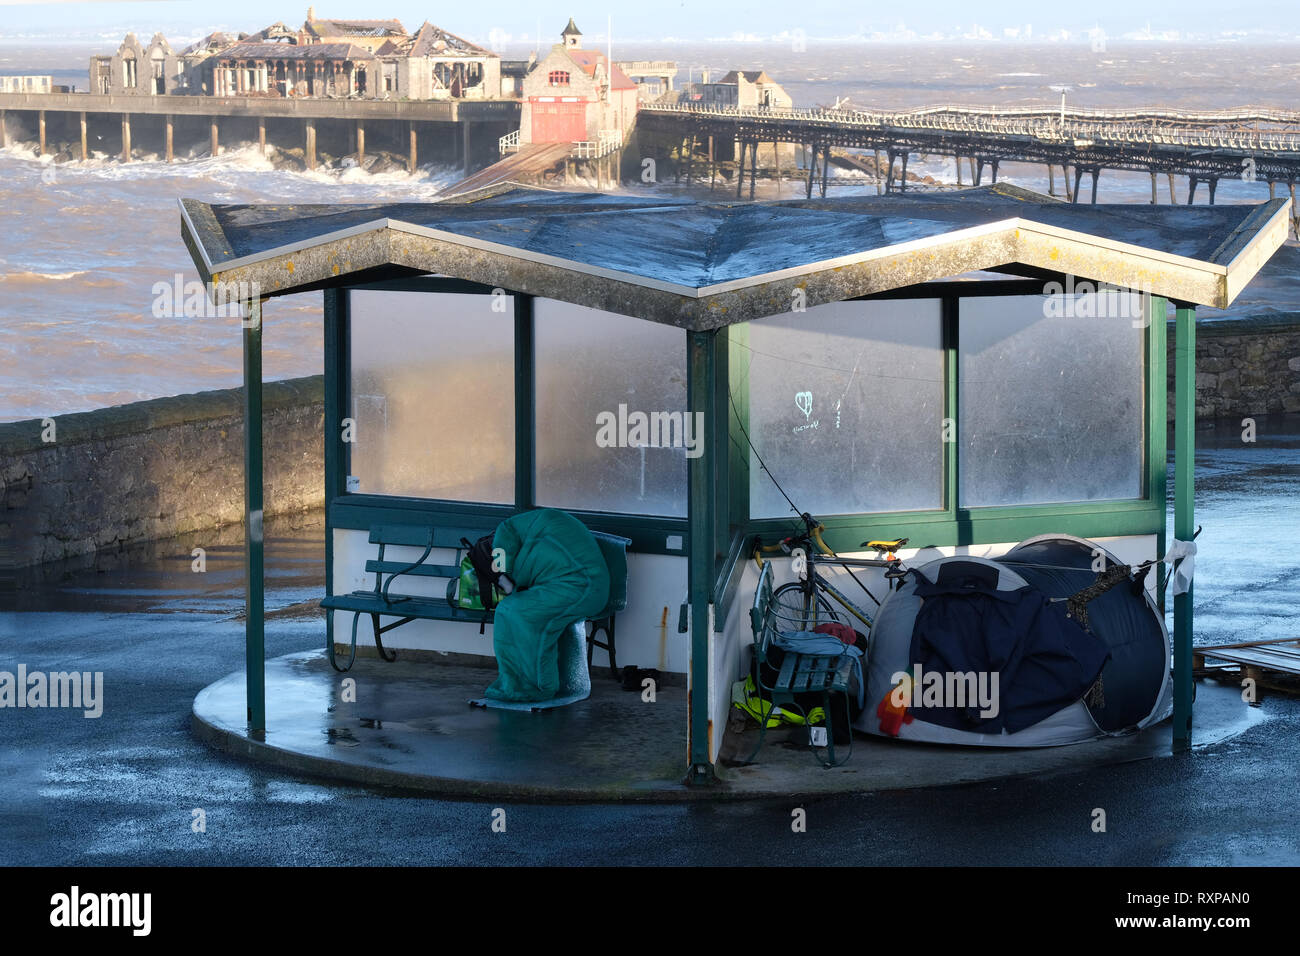 March 2019 - Street folk sleeping rough in front of the old Birnbeck Pier north of Weston super Mare,Somerset,England, UK Stock Photo